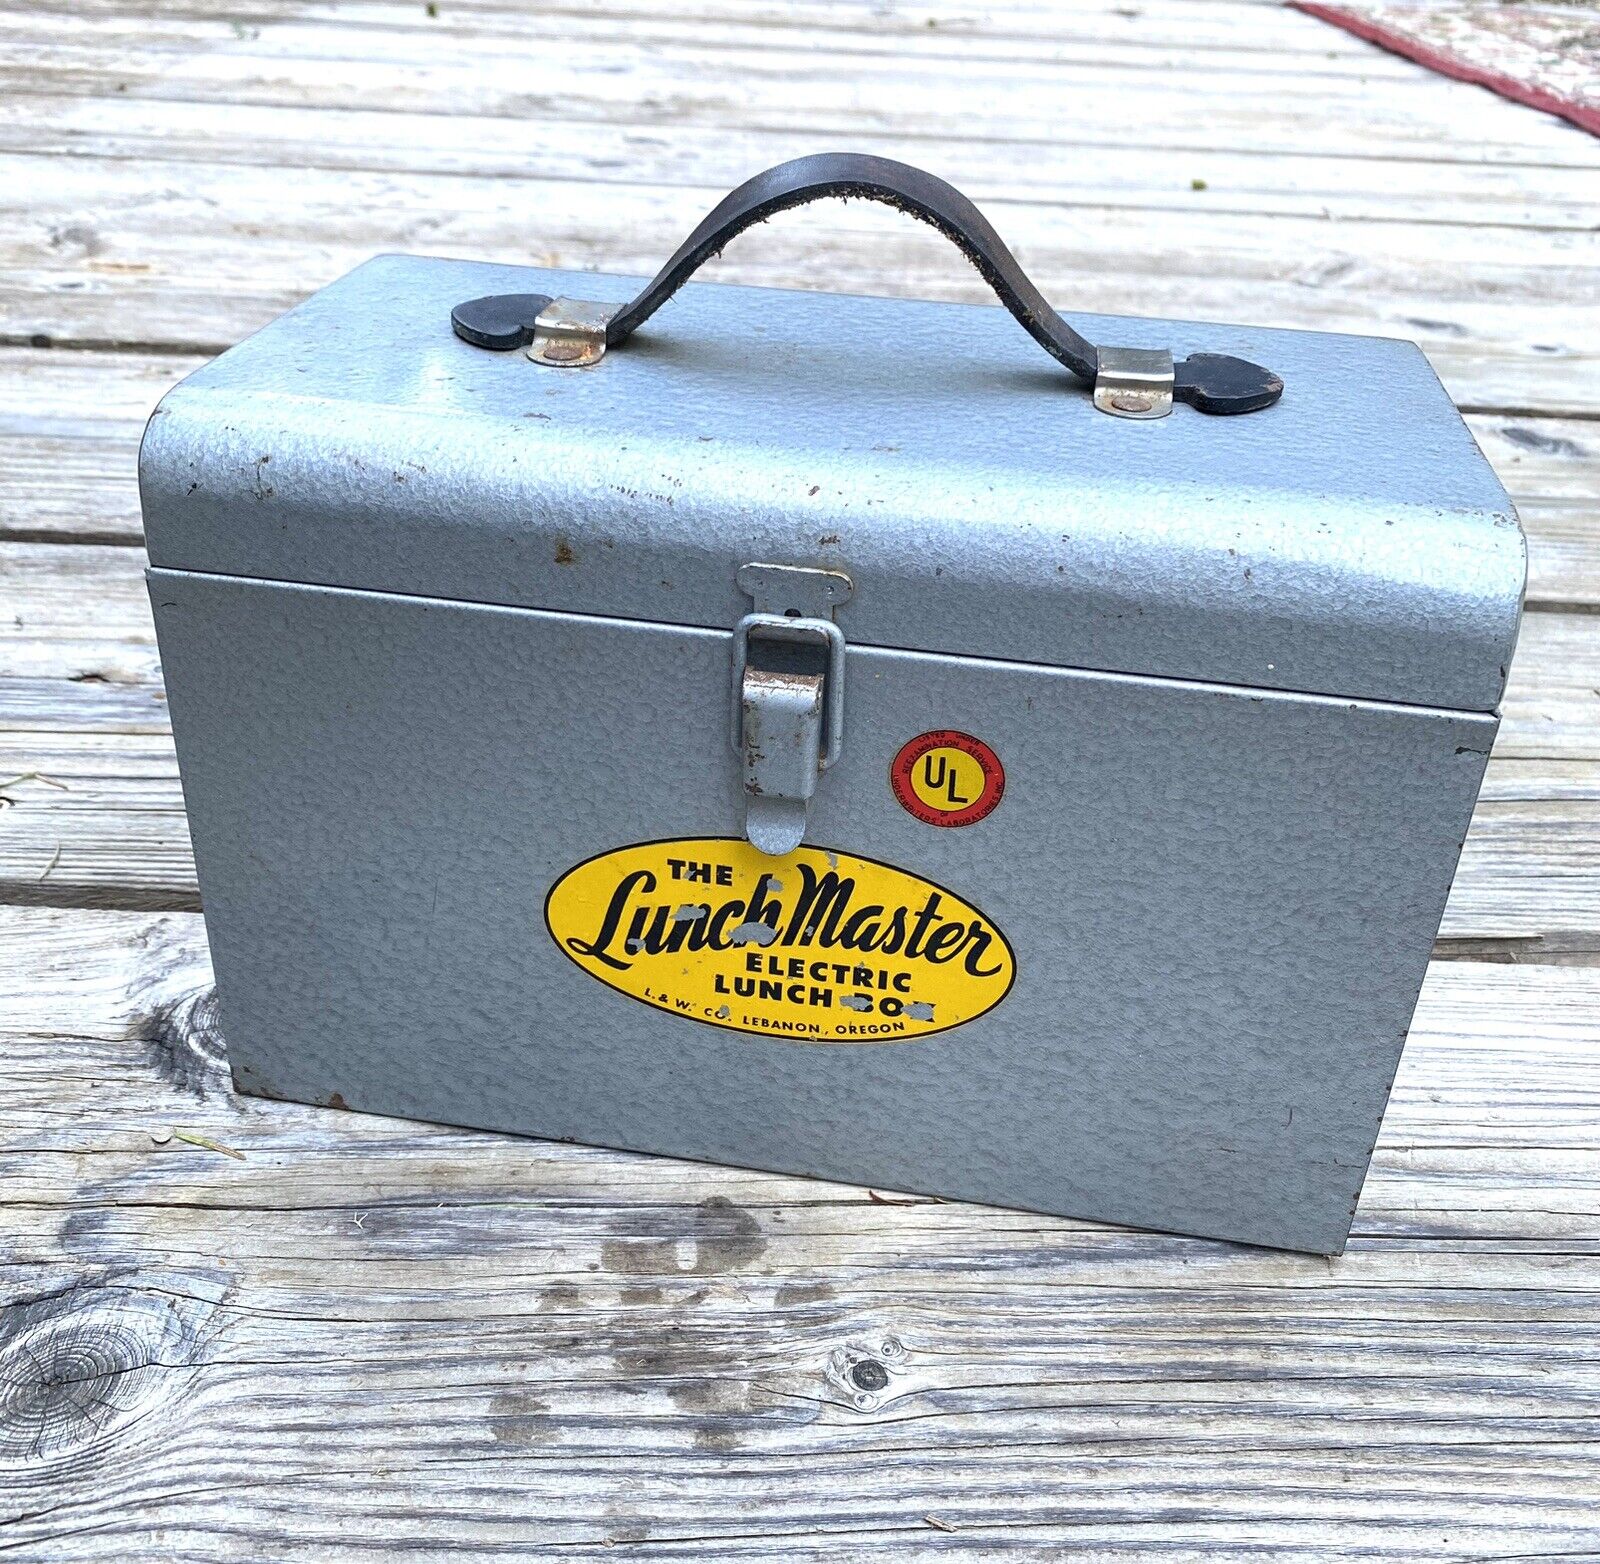 1950s • ‘LUNCH MASTER’ •  Electric Lunchbox • Made in Lebanon, Oregon • RARE